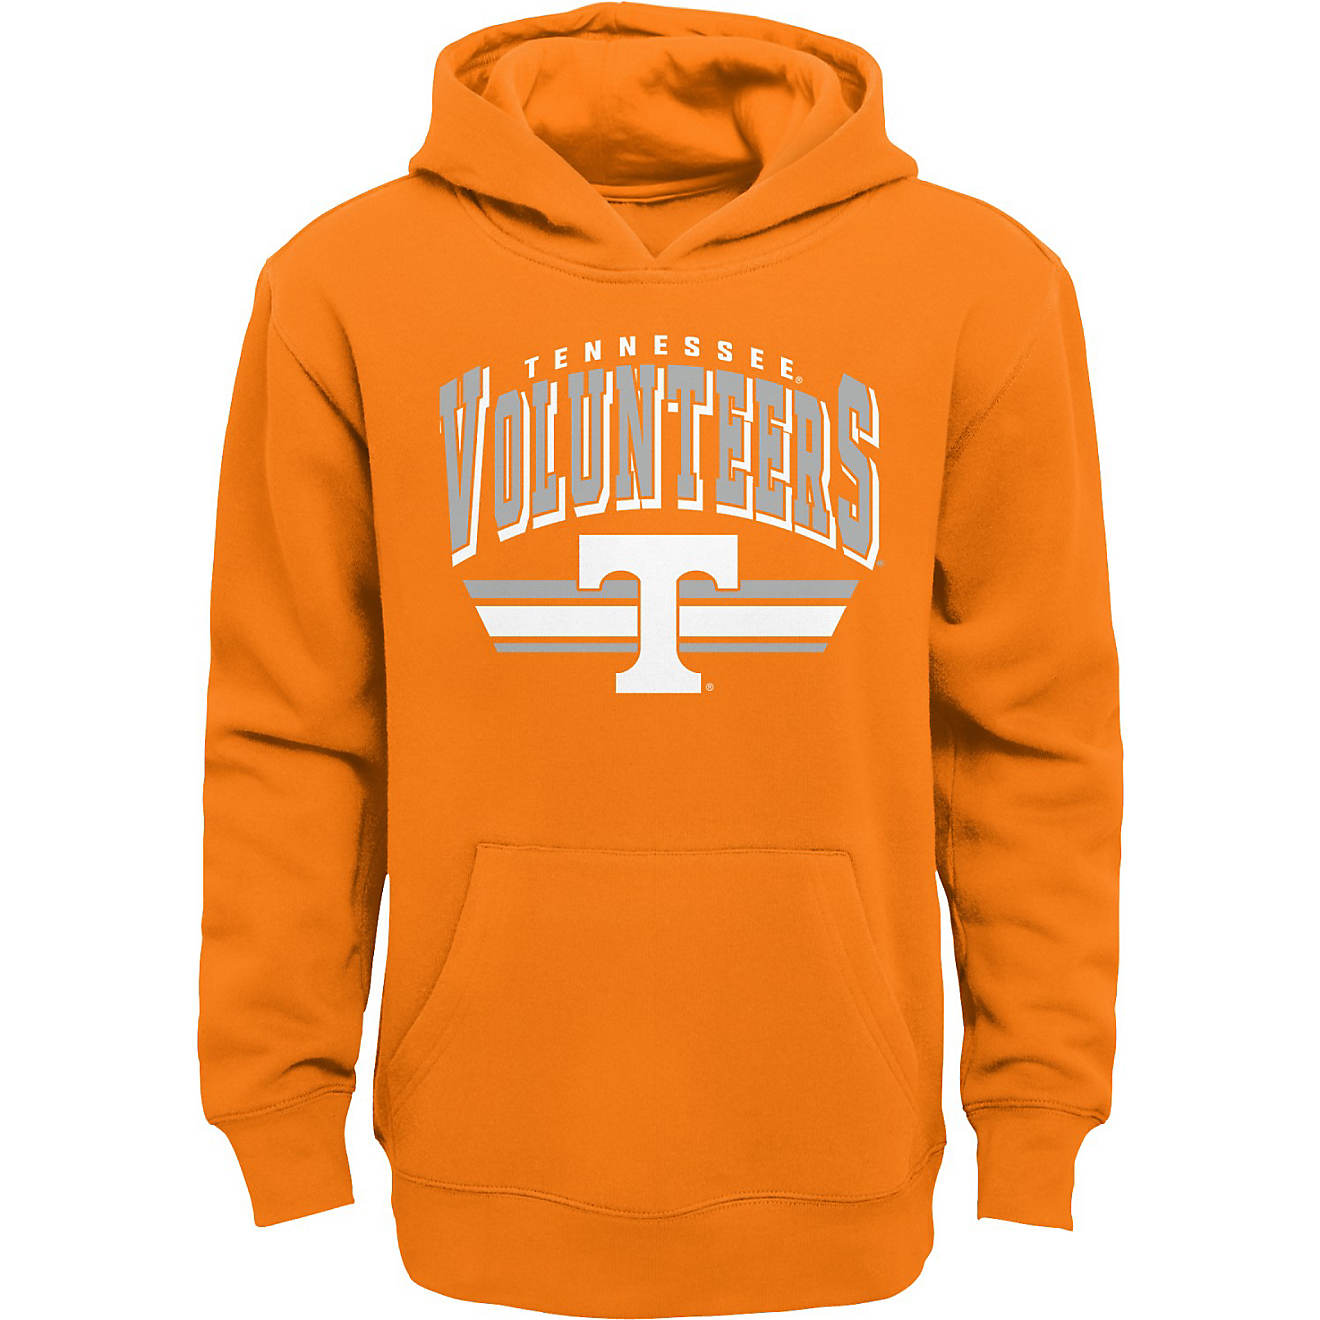 Outerstuff Boys Player Hoodie